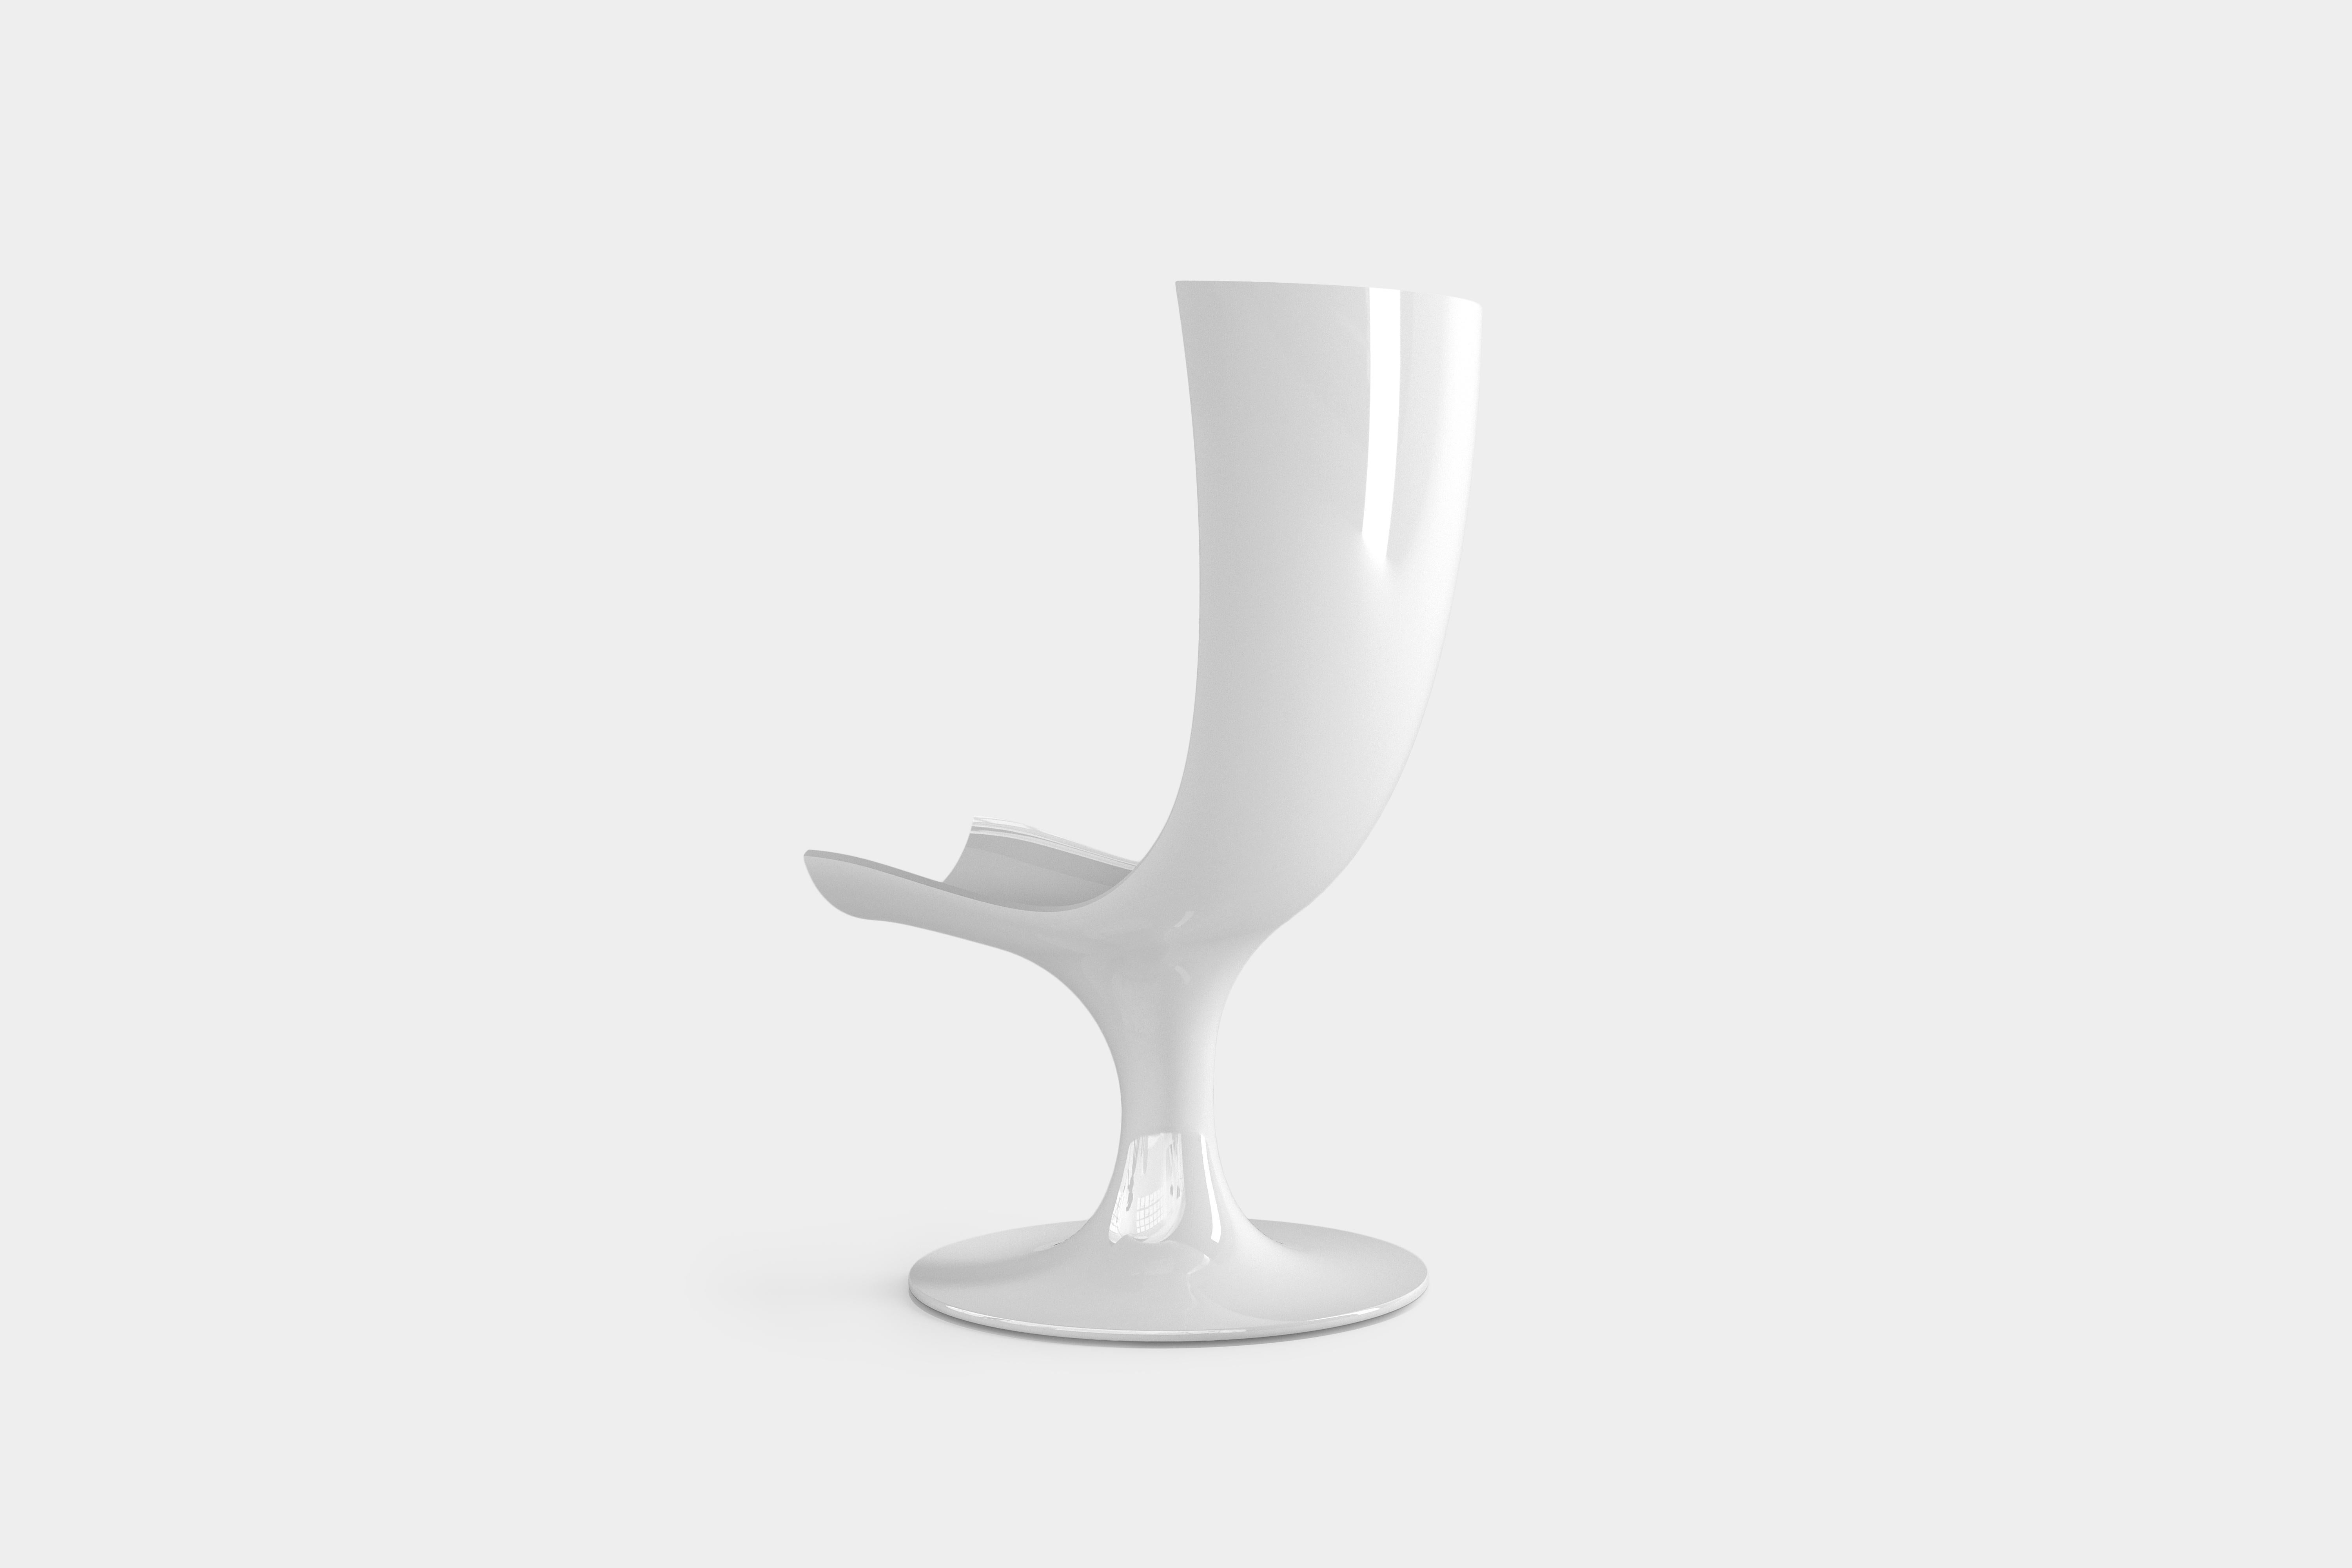 Mexican Santos, Imposing Seat, Sculptural Chair in White by Joel Escalona For Sale